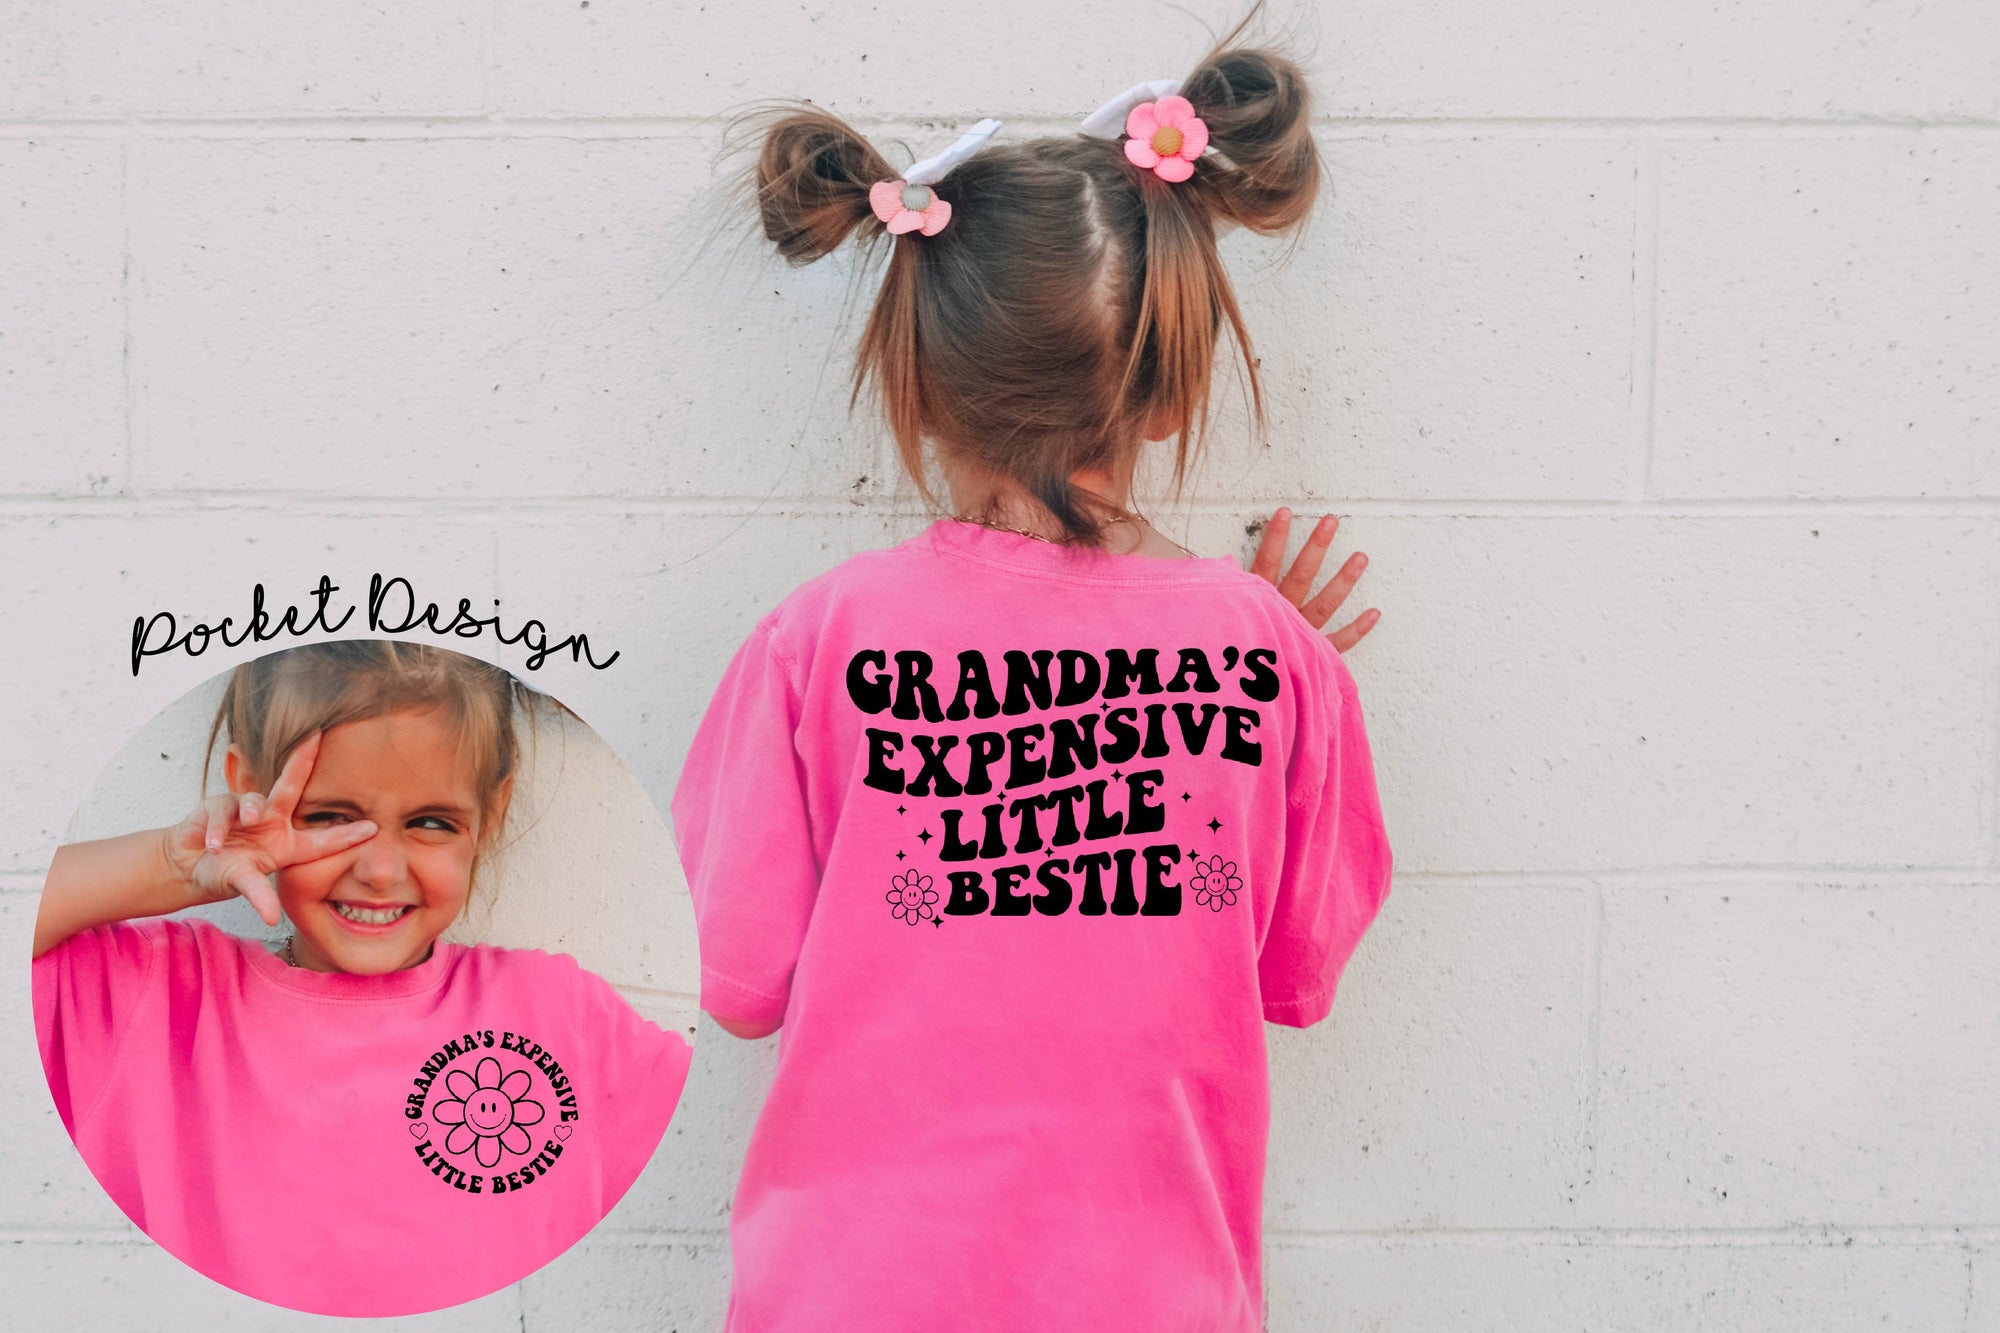 Grandma's Expensive Little Bestie/Pink (with pocket design) Sweatshirts also available